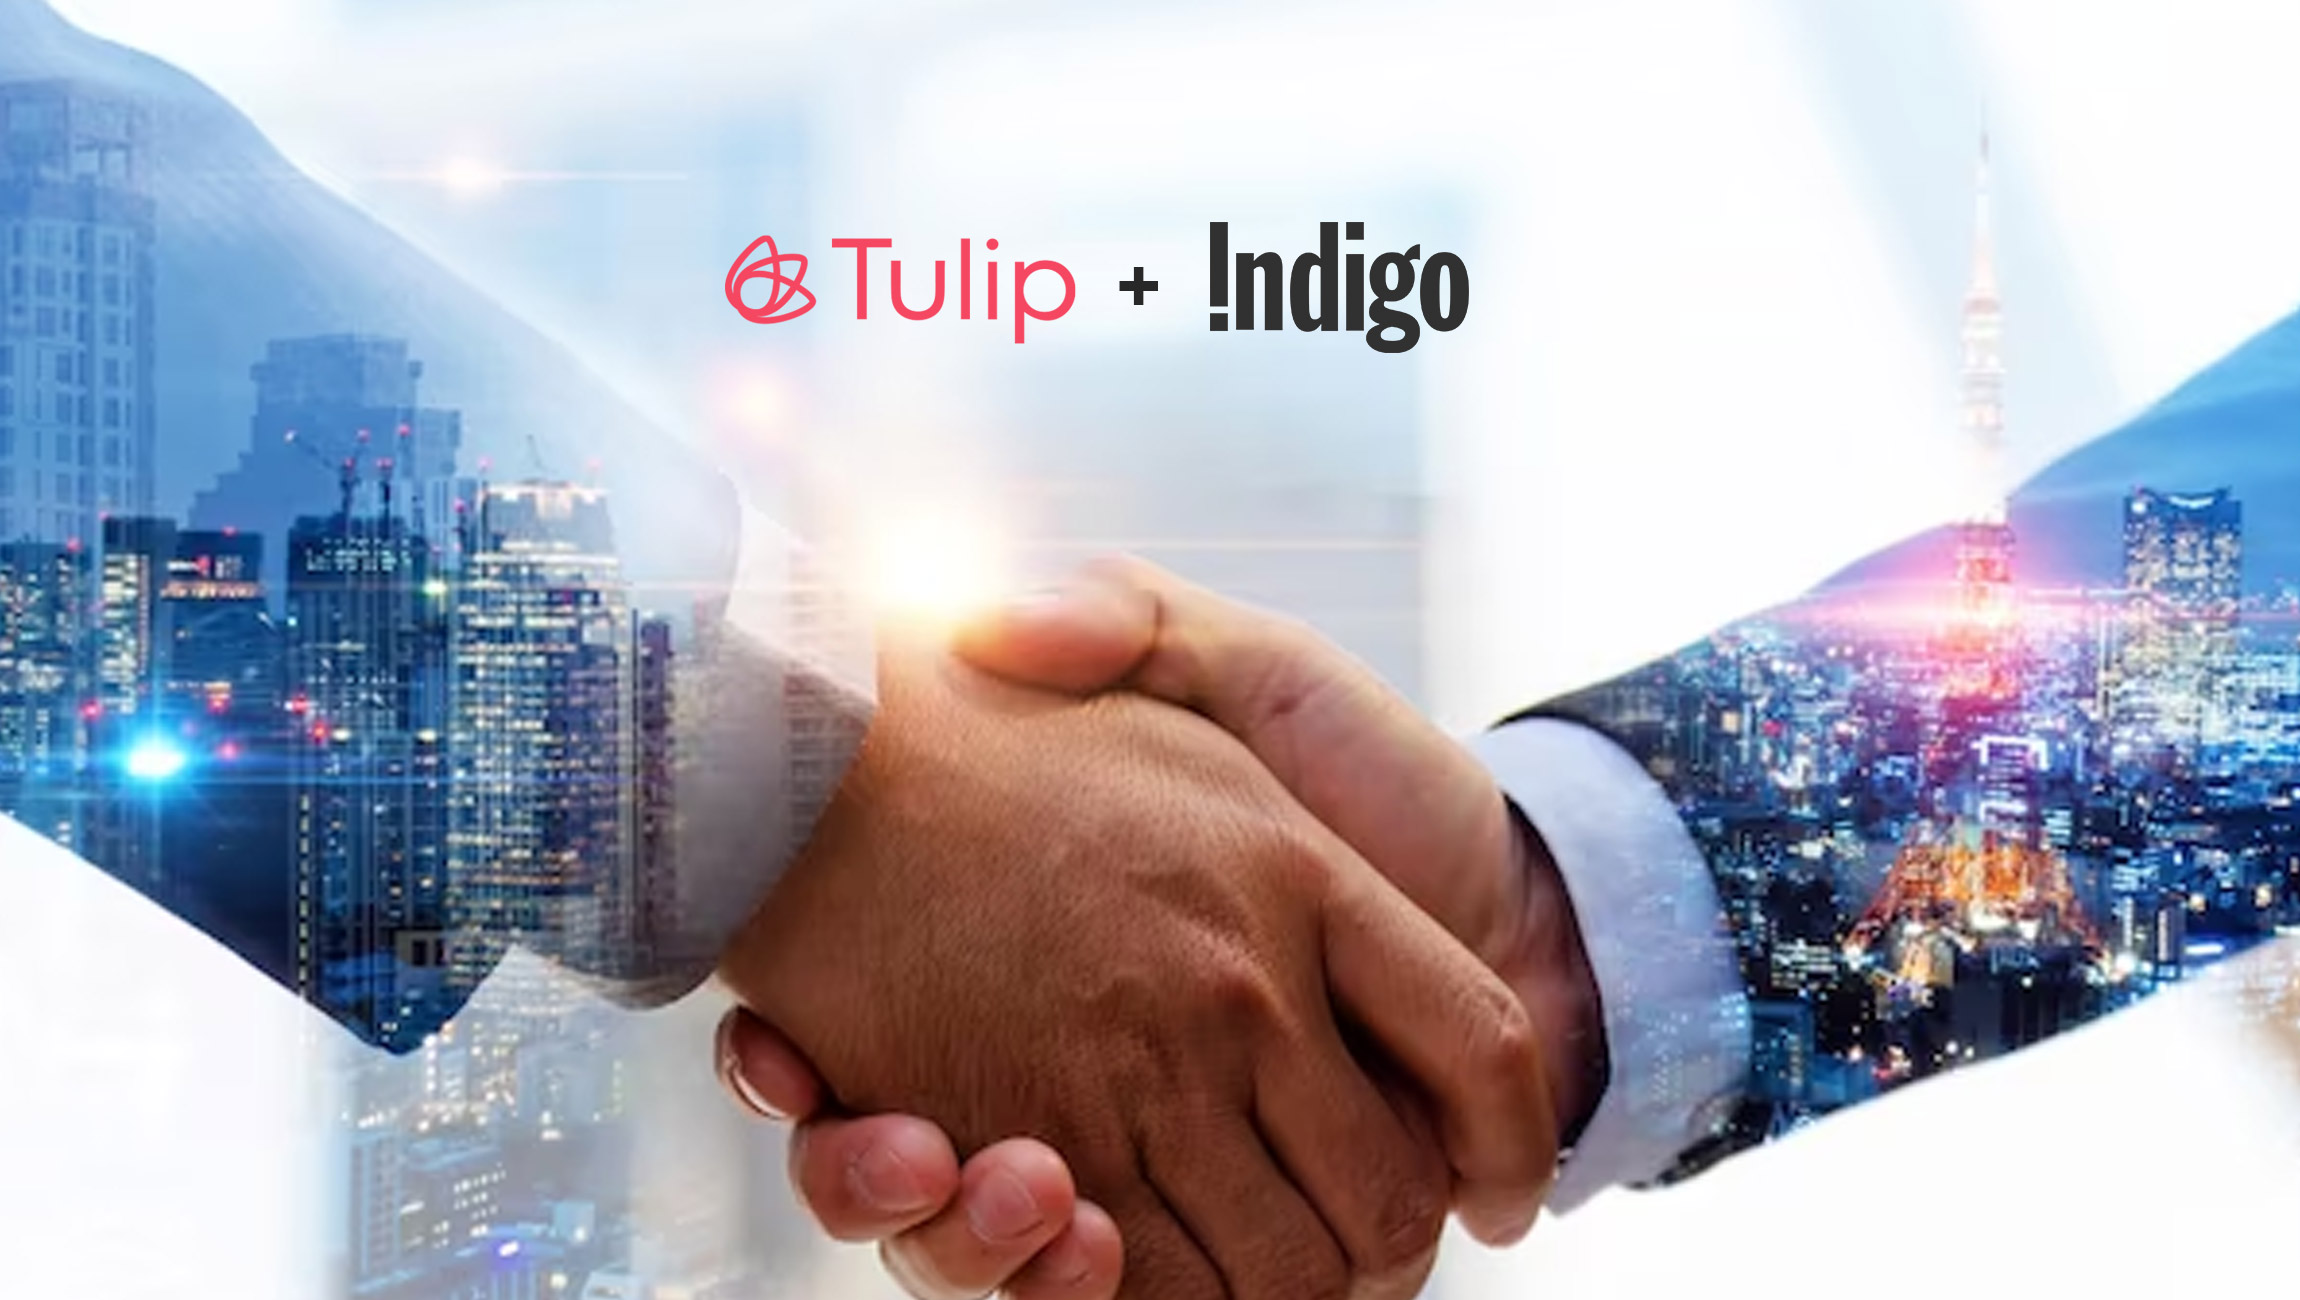 Indigo Extends Partnership to Continue Leveraging Tulip's Mobile POS Solution